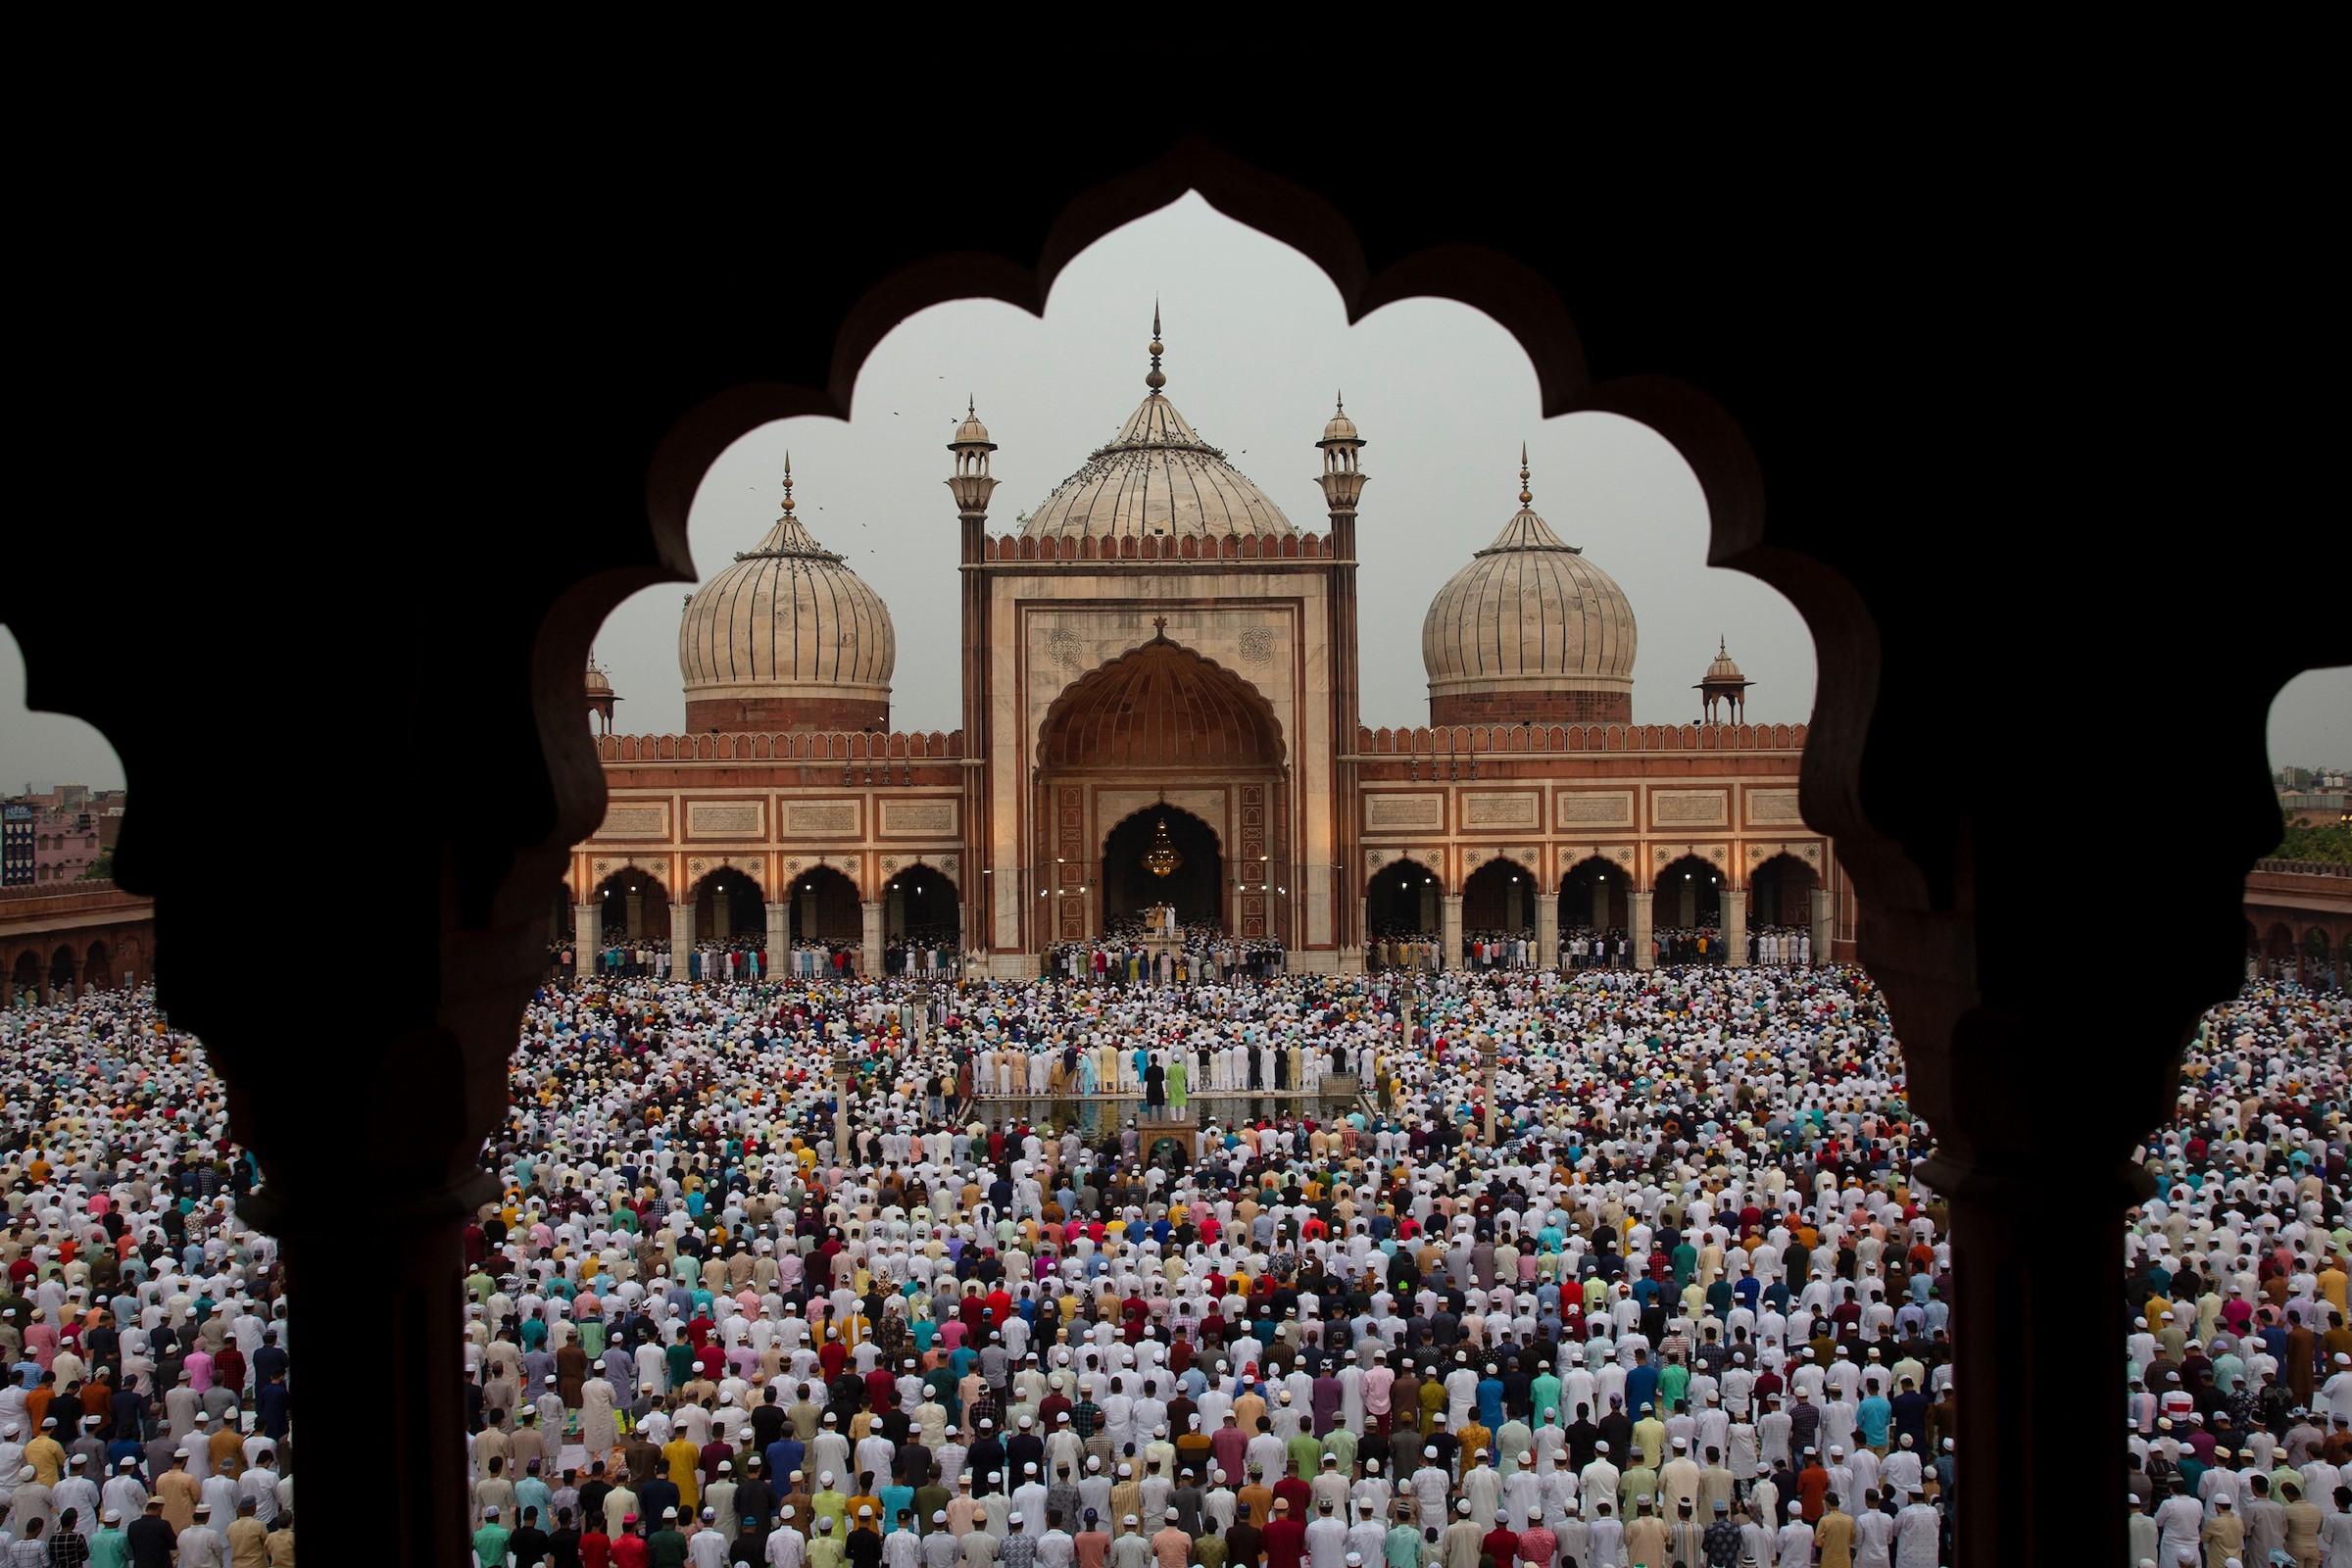 Muslims gather to offer Eid al-Fitr prayers at the Jama Masjid in New Delhi, India, May 3, 2022. Eid al-Fitr marks the end of the fasting month of Ramadan. (Javed Dar—Xinhua/Getty Images)